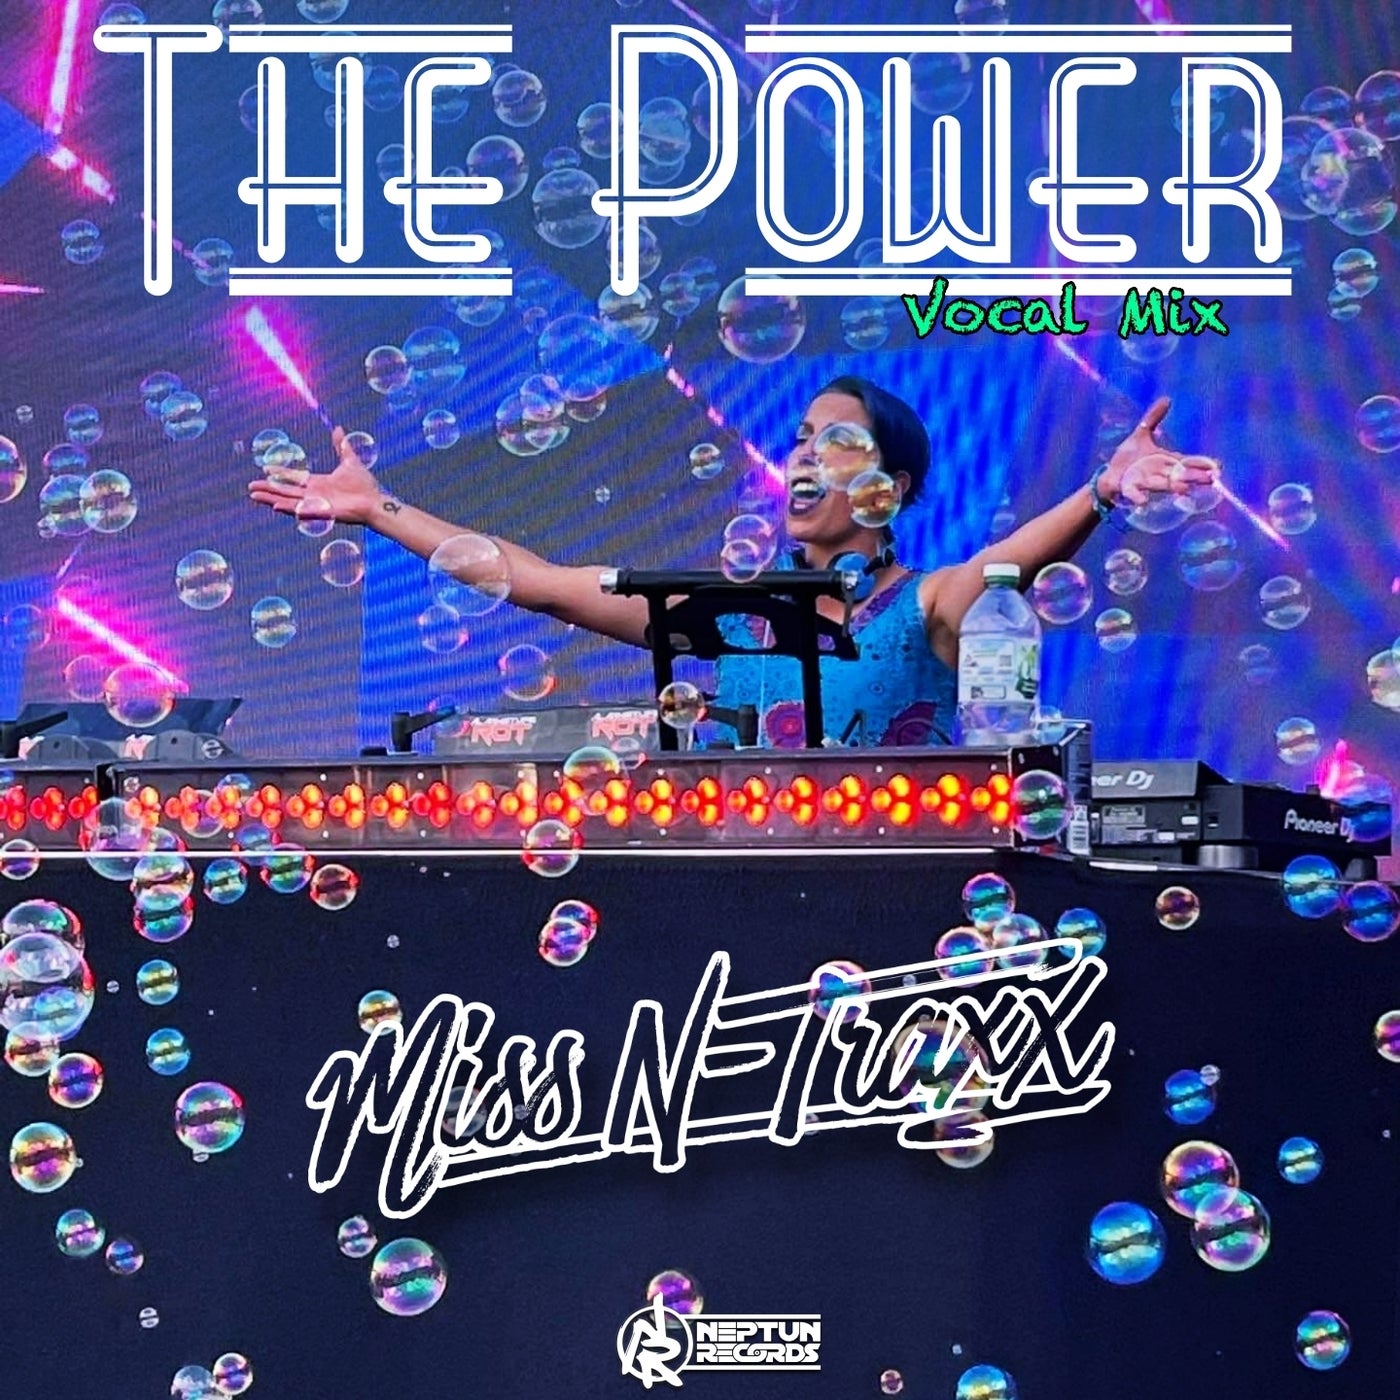 The Power (Vocal Mix)